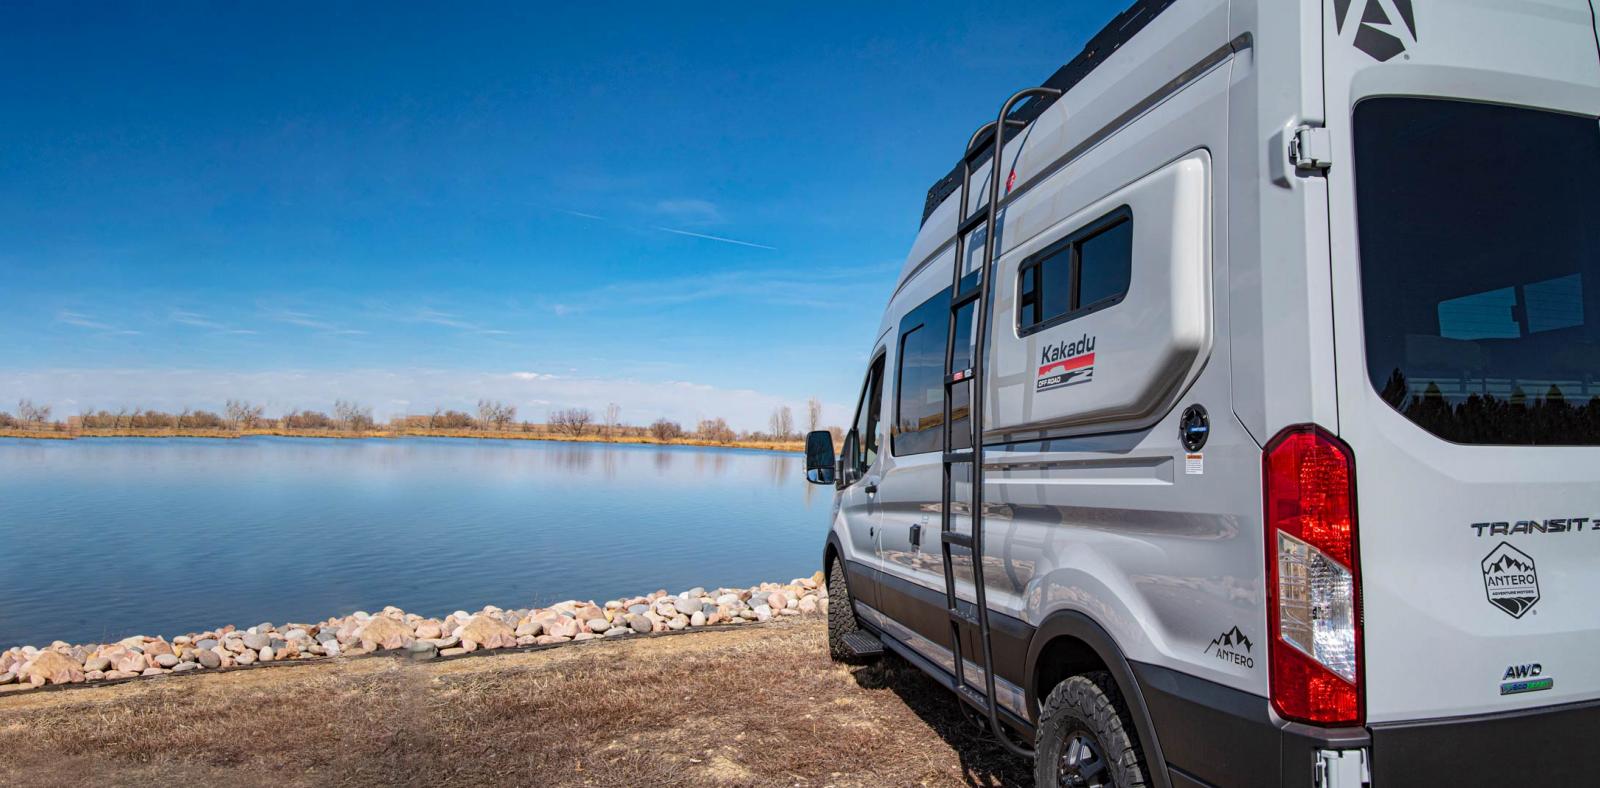 An Antero Adventure Van facing a lake in the background